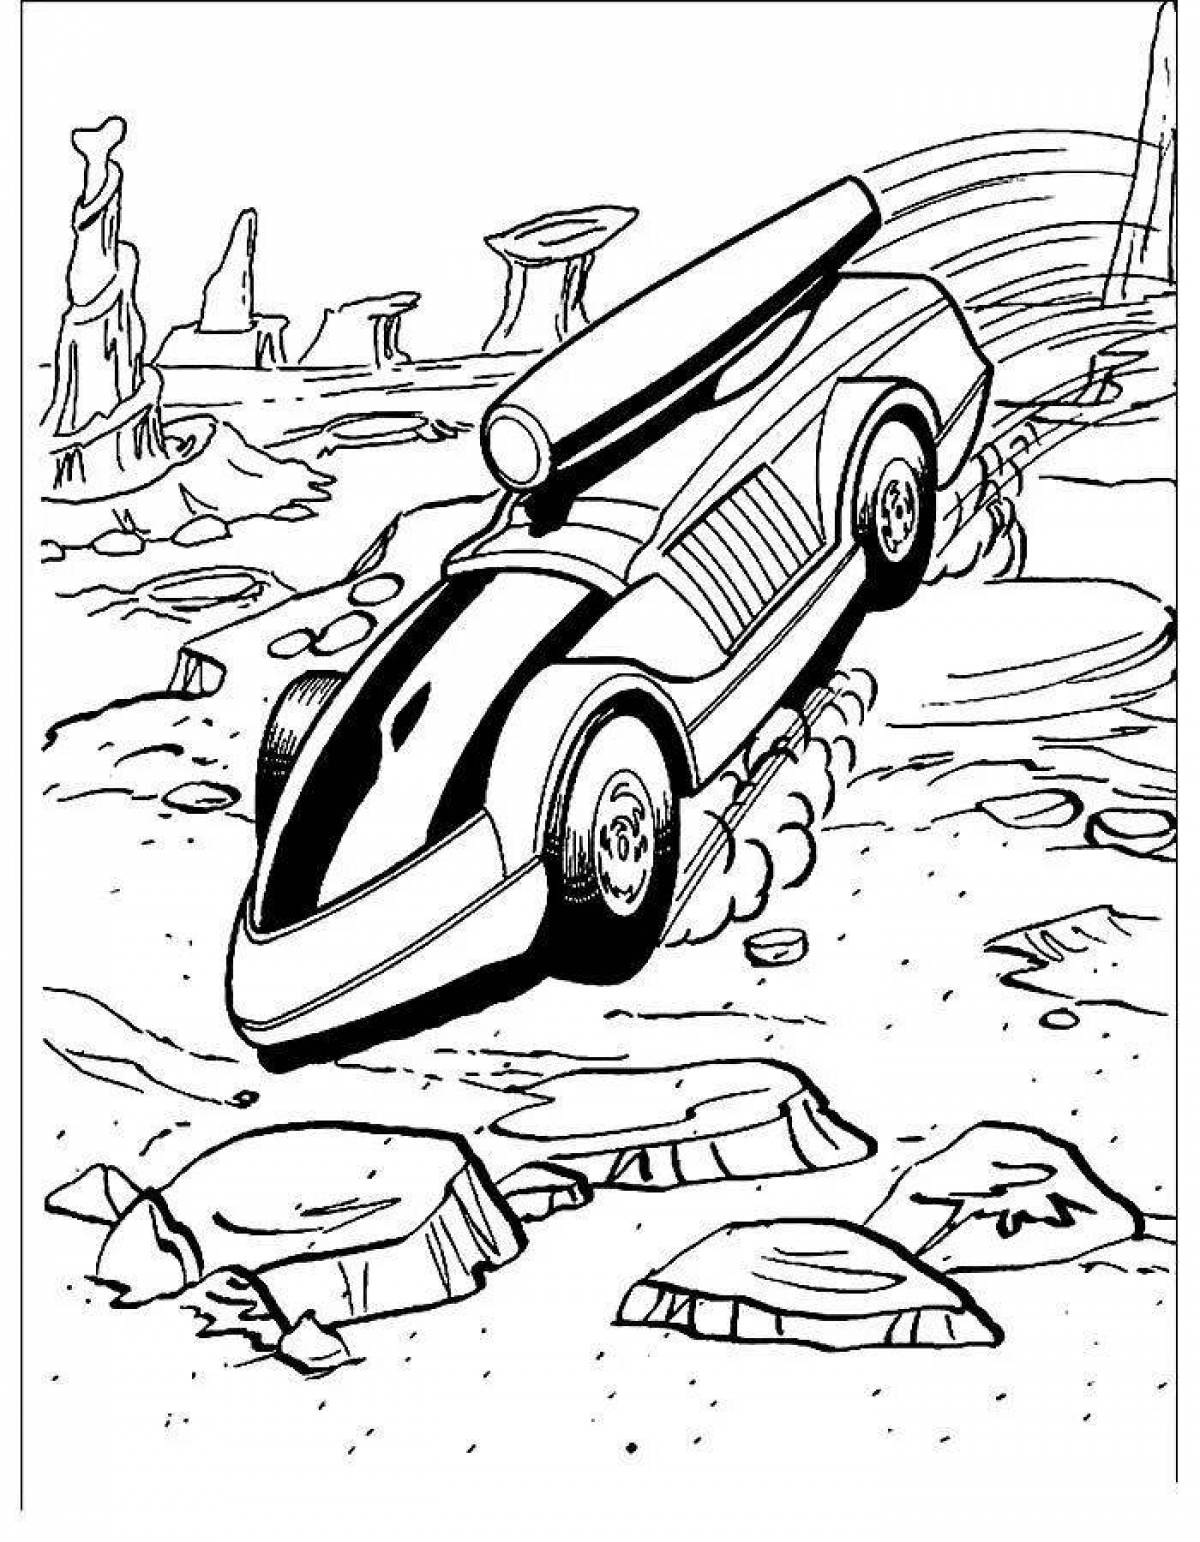 Exquisite hot wheels coloring book for boys